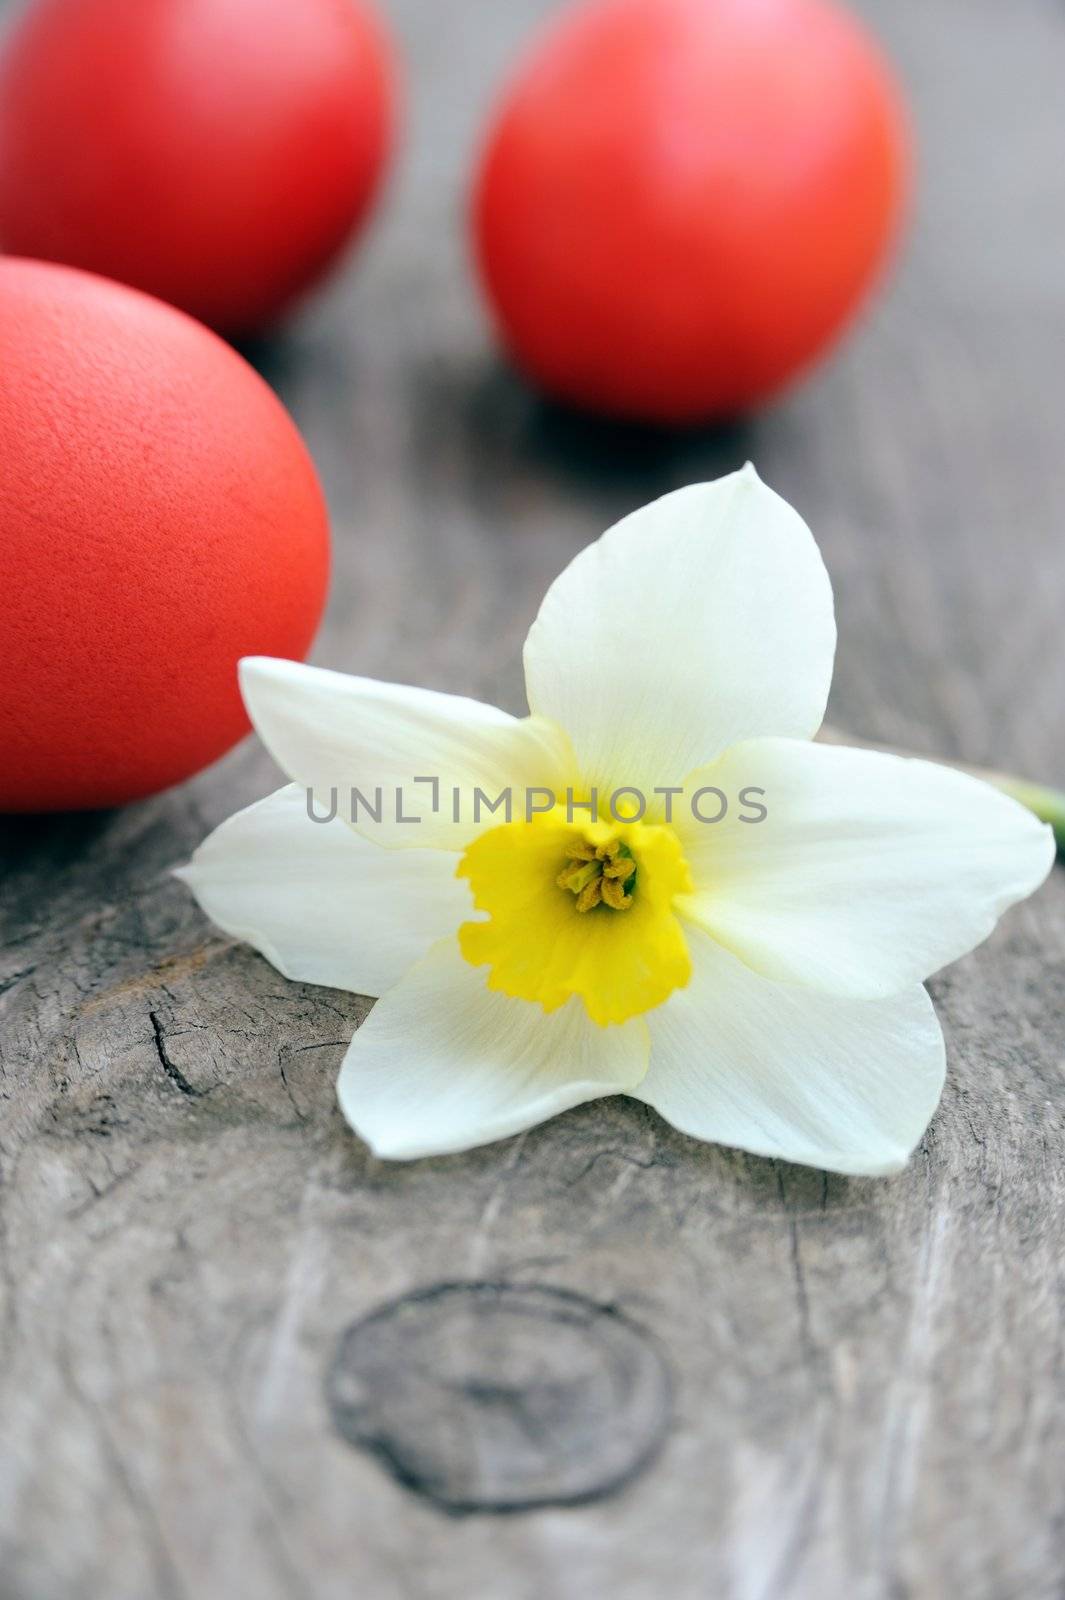 An image of purple eggs and a daffodil